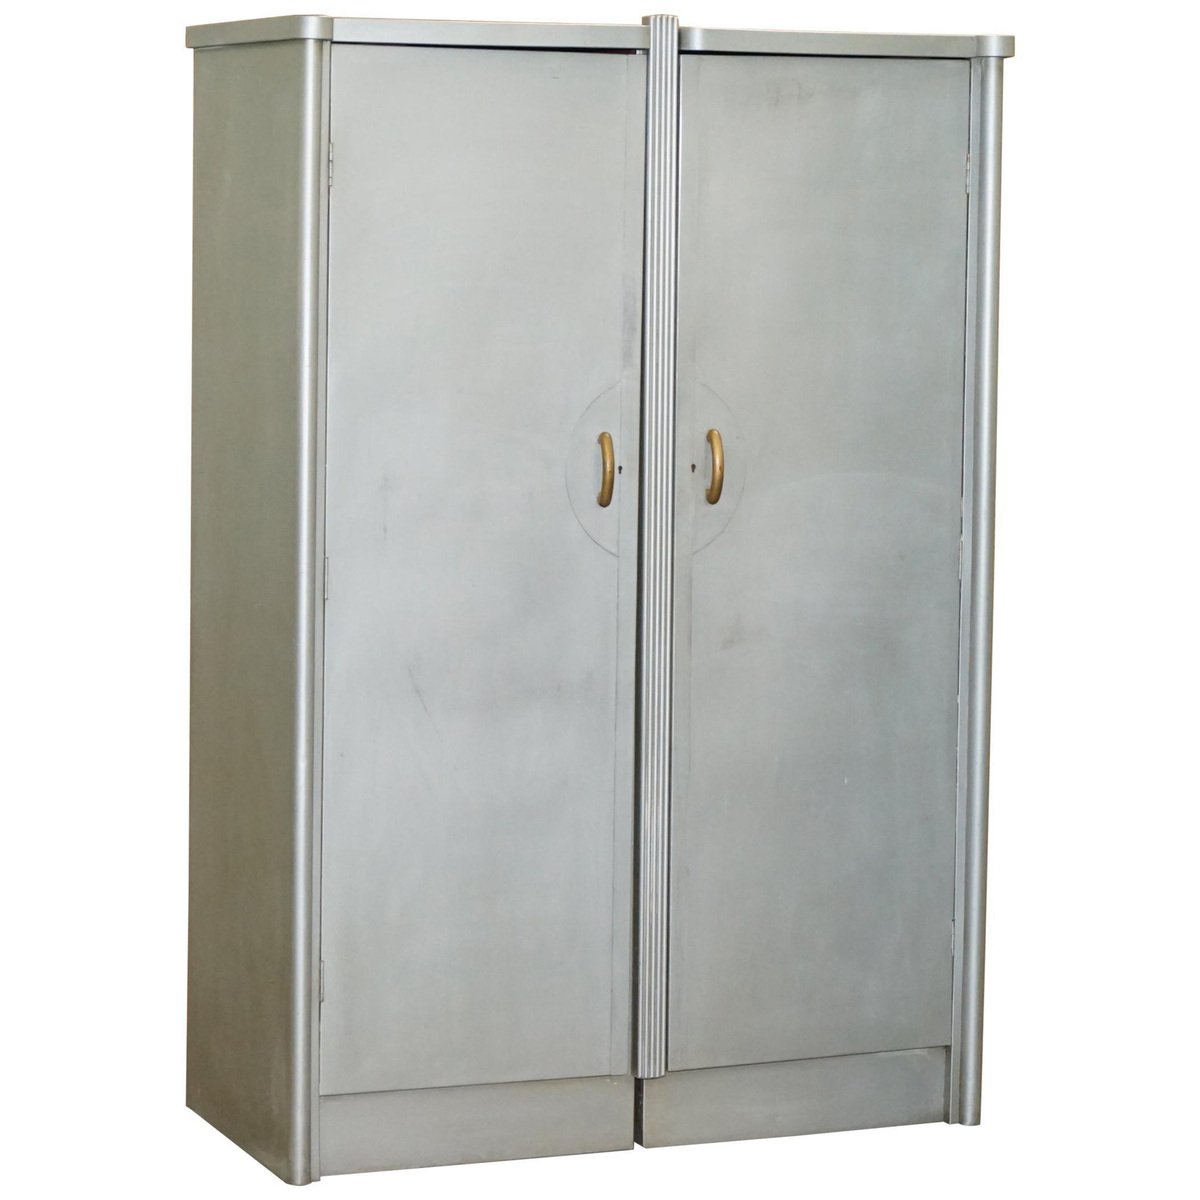 industrial art deco double wardrobe with aluminium frame drawers from huntington aviation GZP-1007038